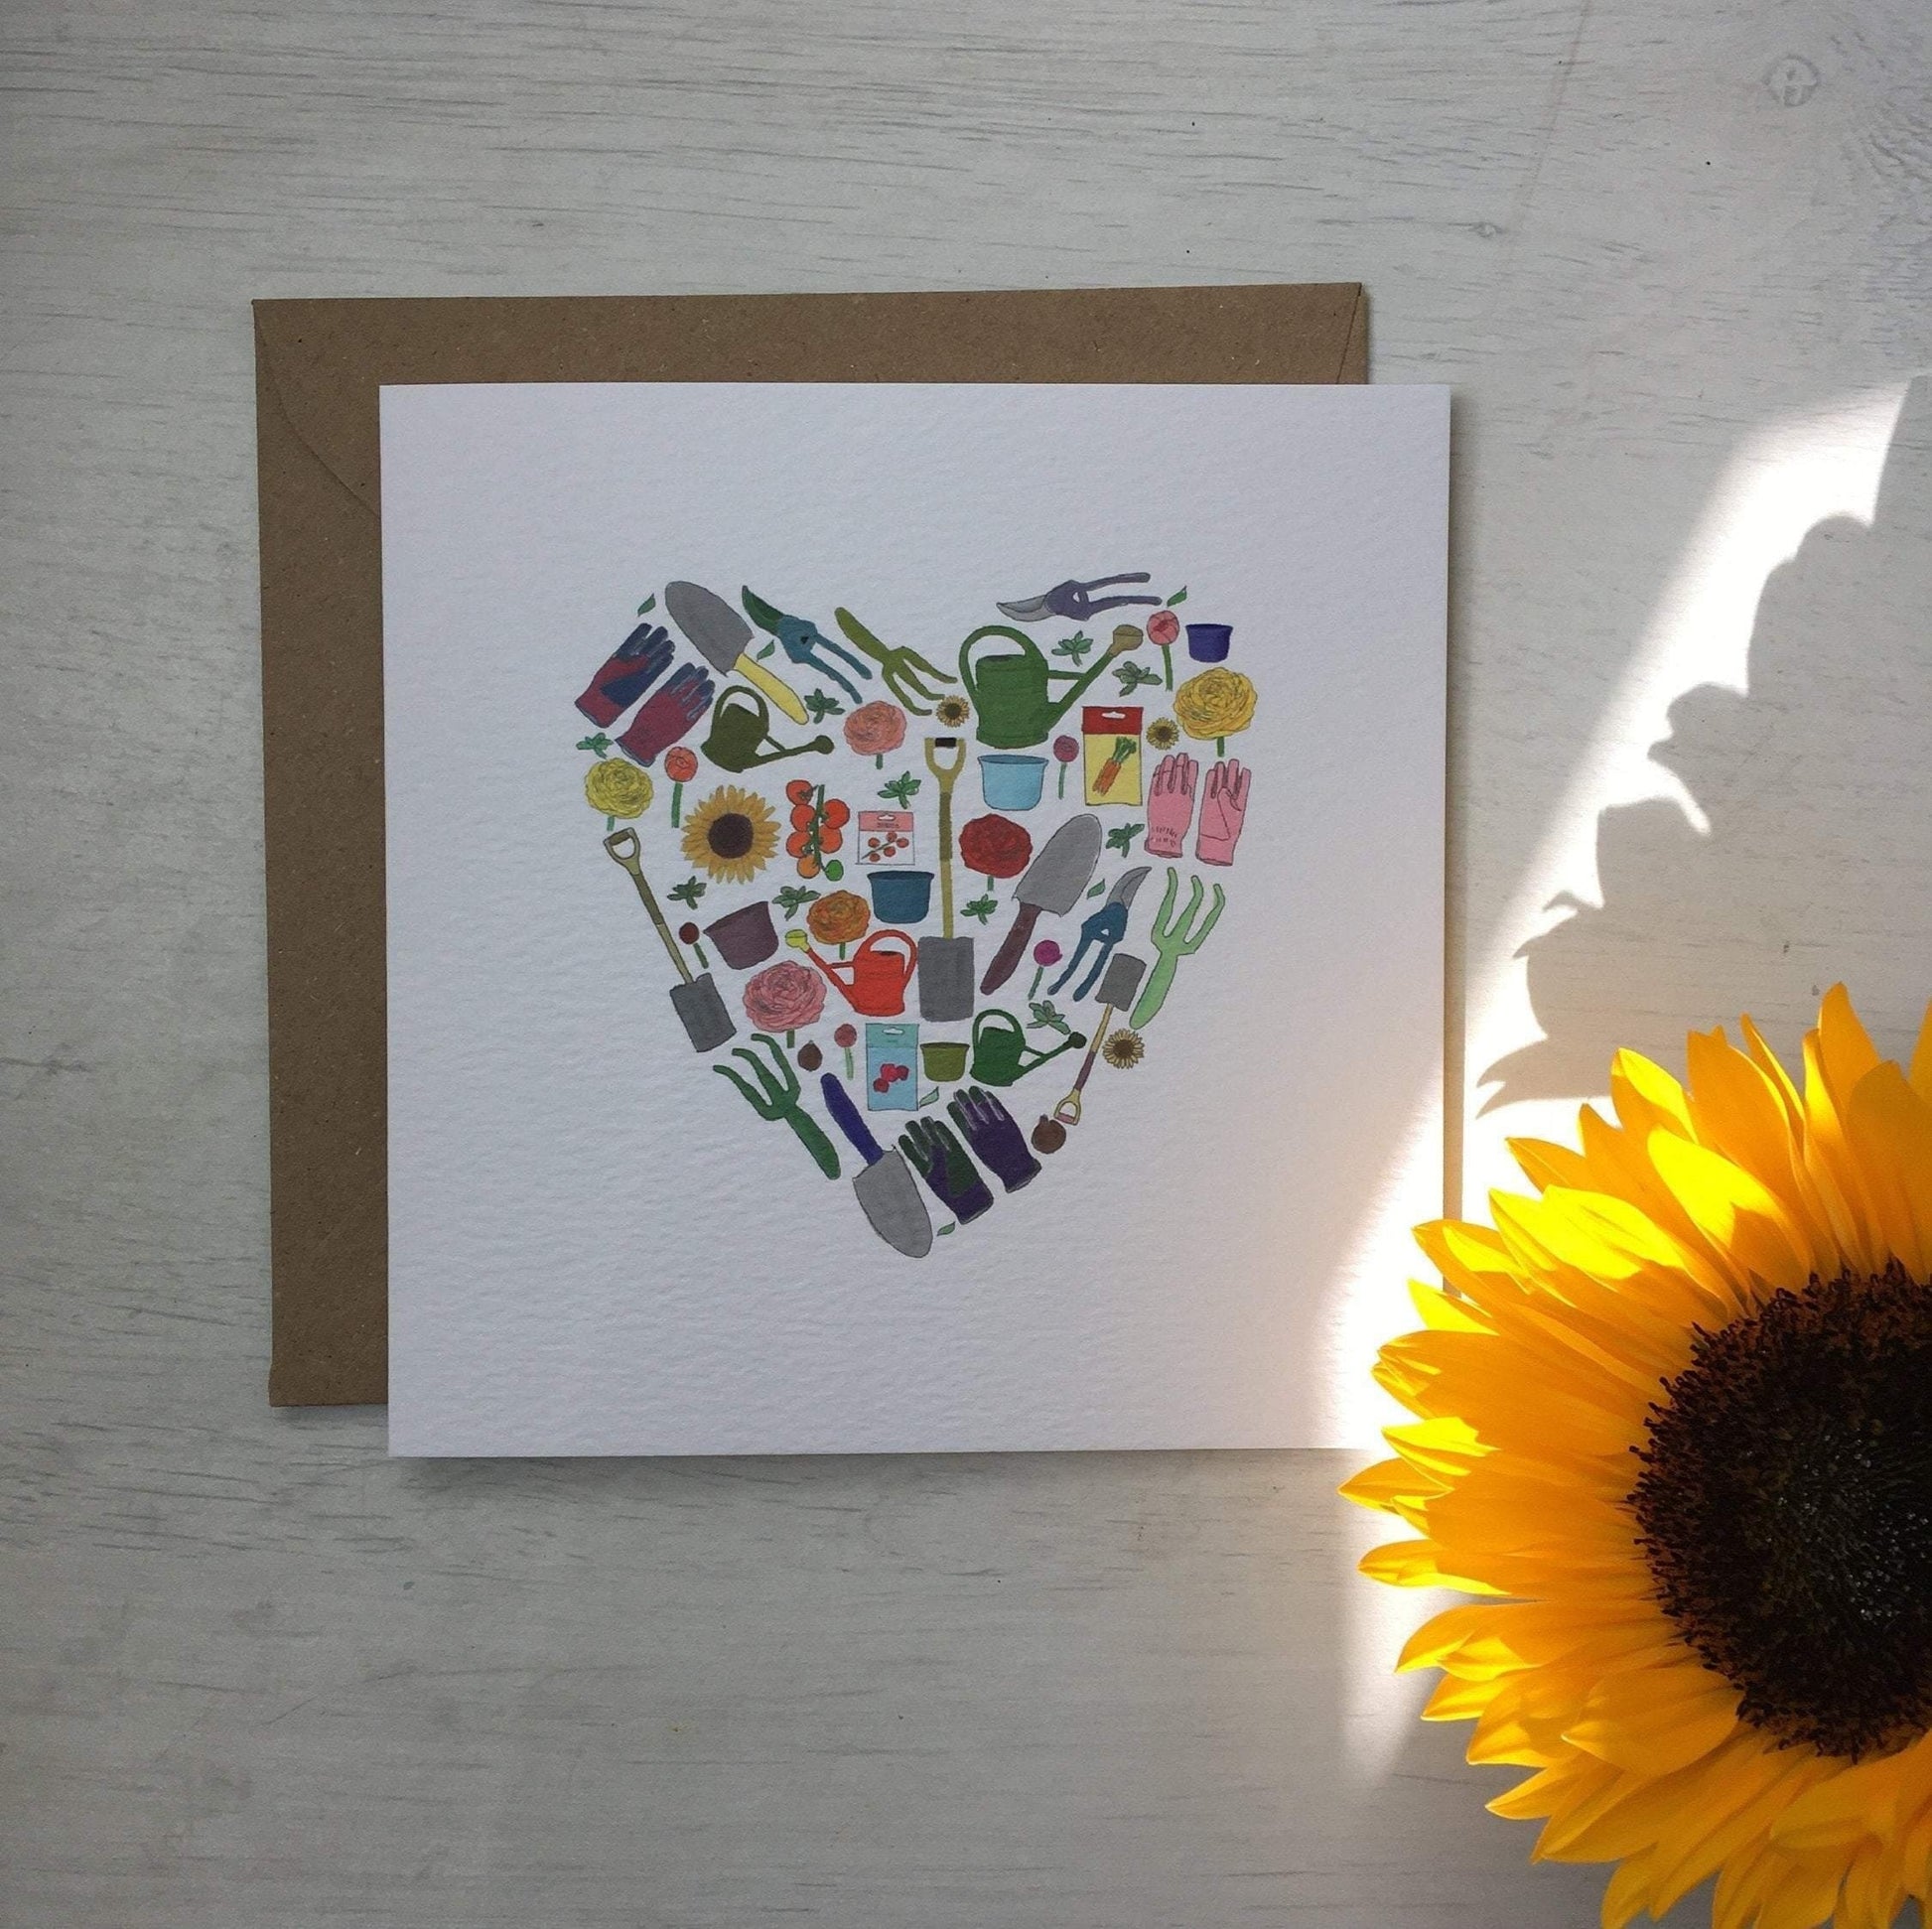 Luxury printed garden theme card with lots of gardening things all displayed in the shape of a heart